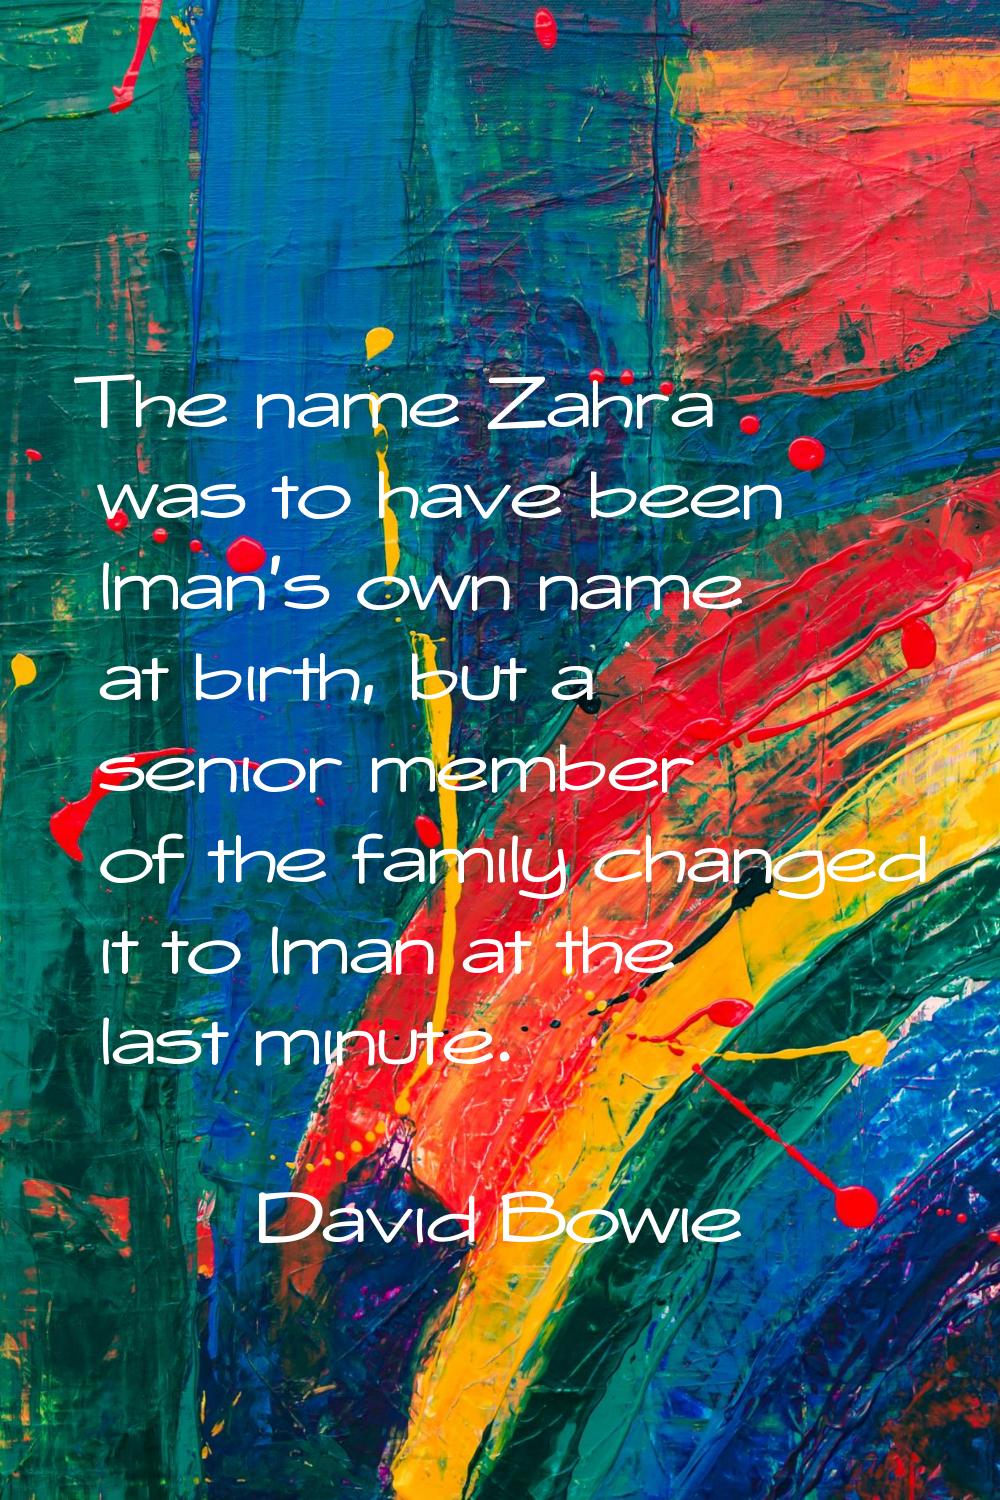 The name Zahra was to have been lman's own name at birth, but a senior member of the family changed